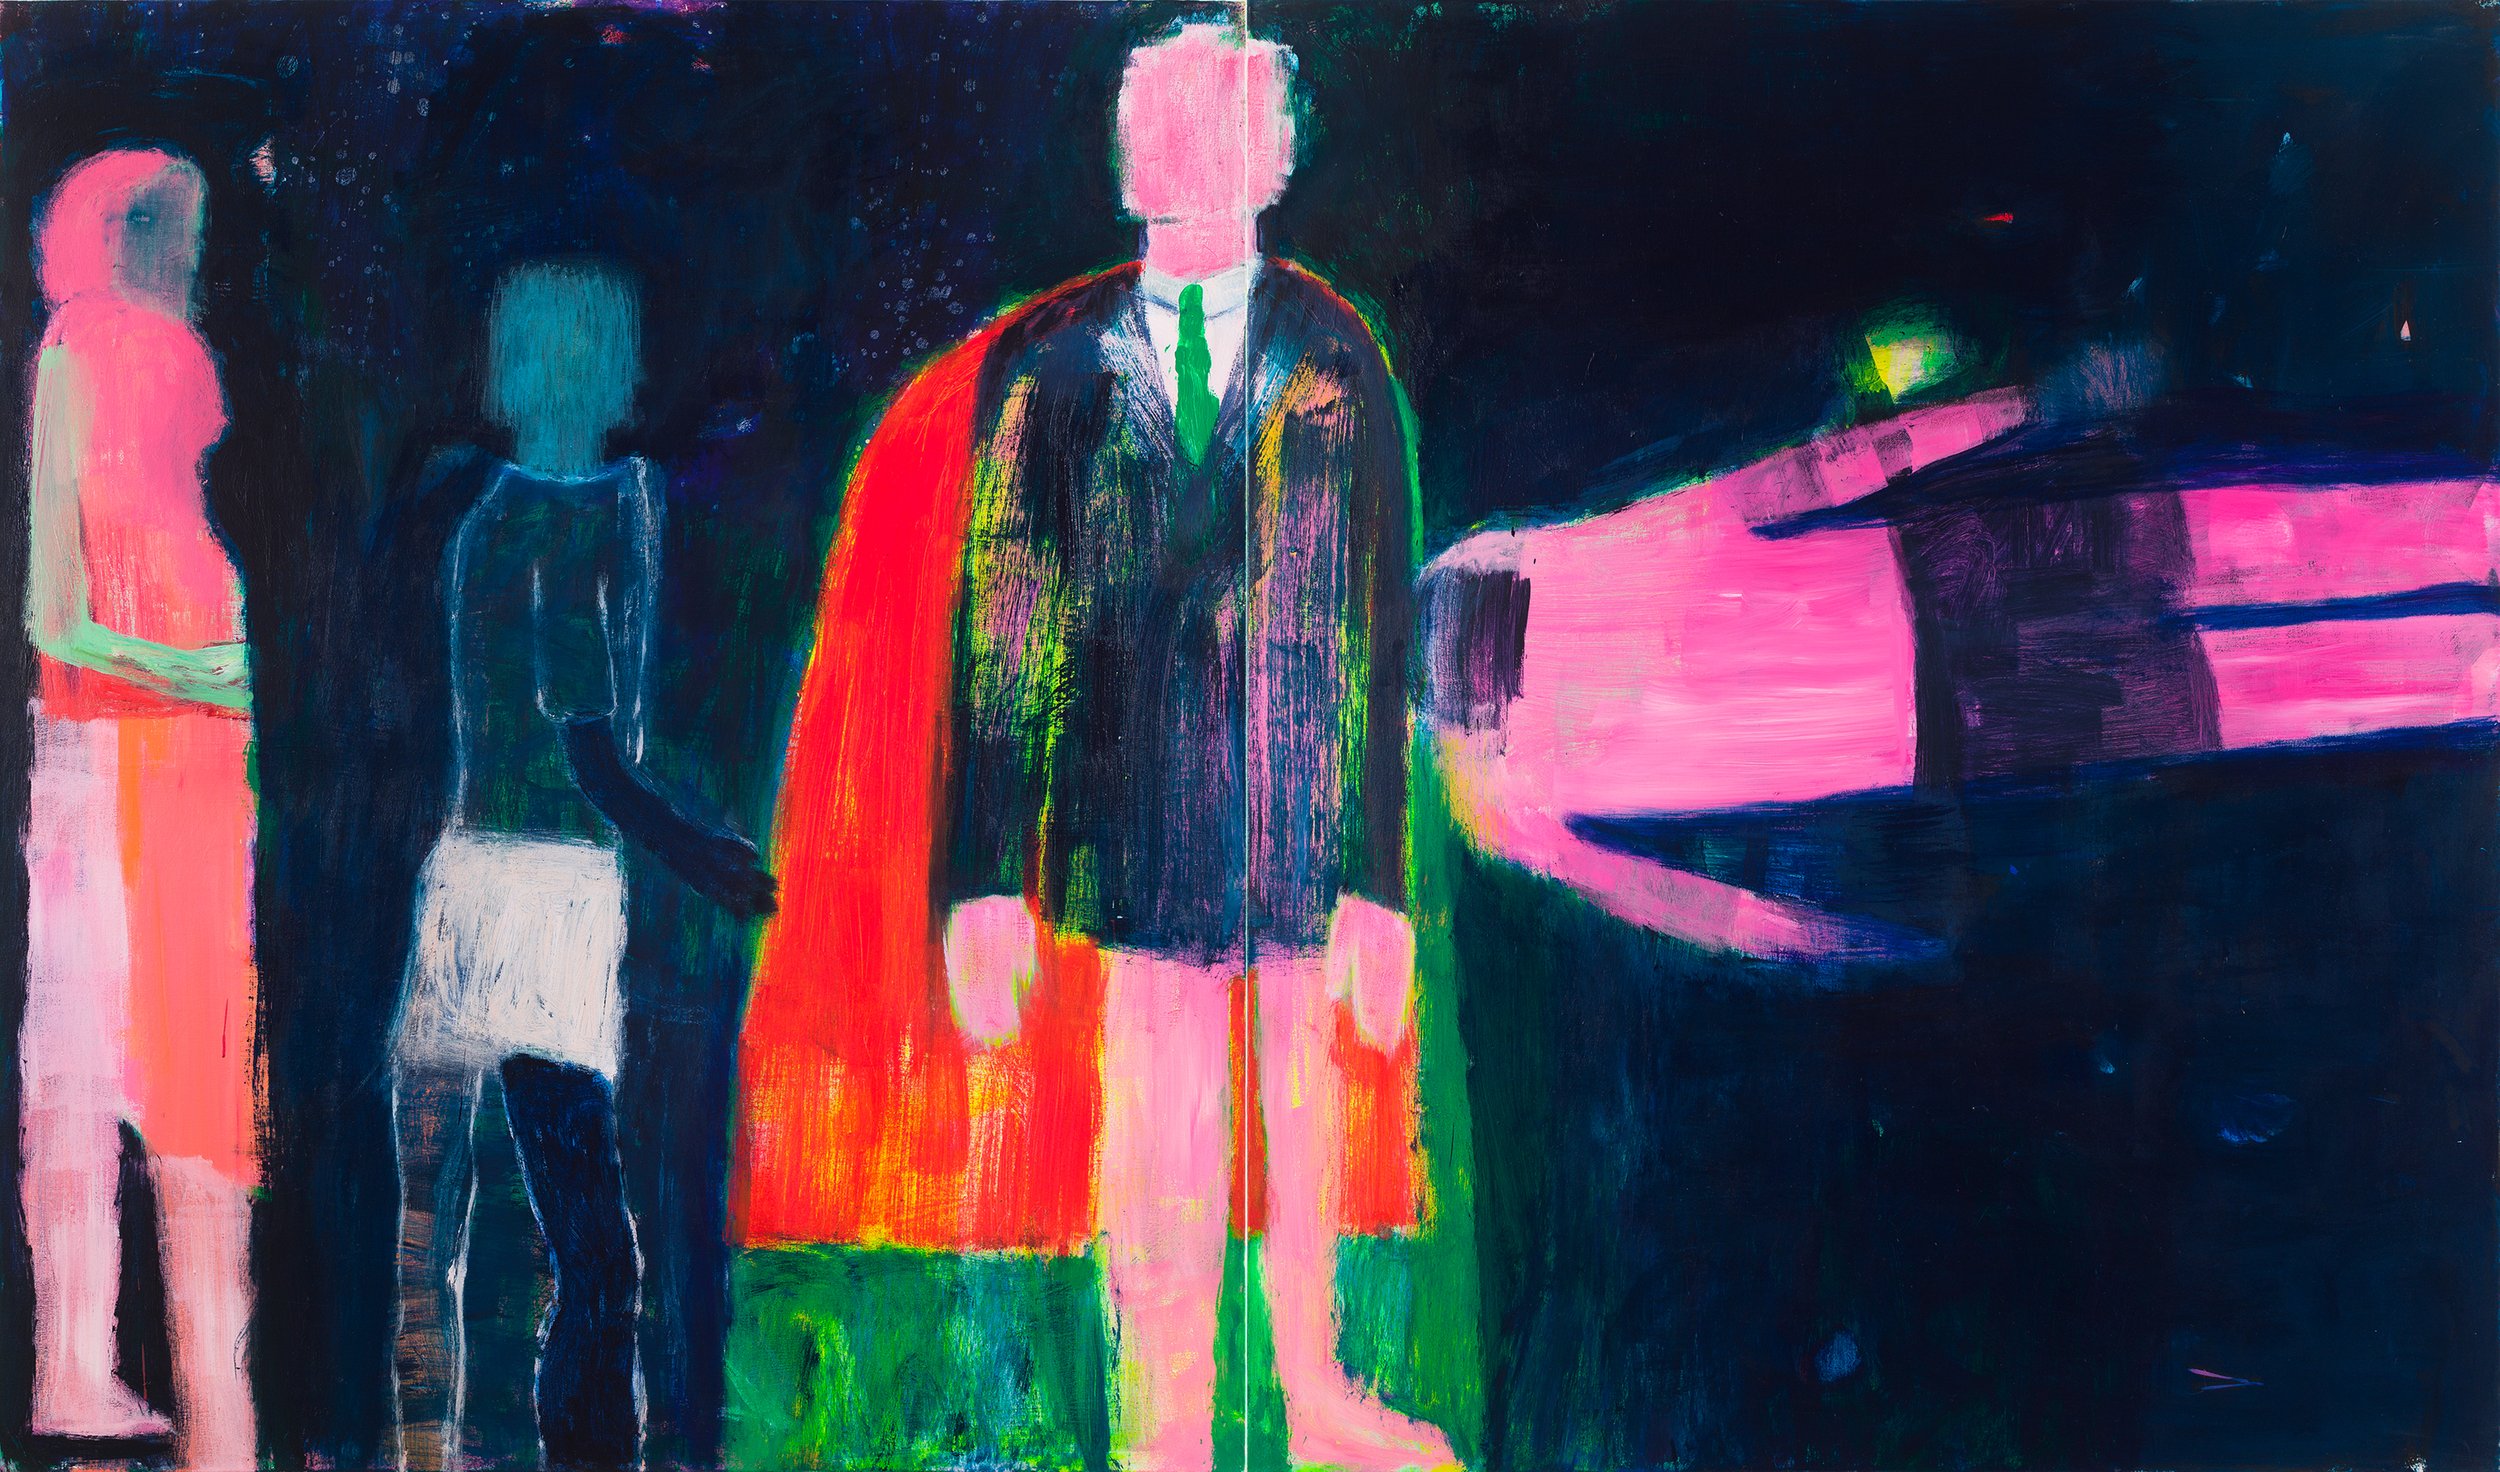  Katherine Bradford (United States, born 1942),  Green Tie , 2018, acrylic on canvas, 80 x 136 inches. Collection Nerman Museum of Contemporary Art, Johnson County Community College, Overland Park, Kansas, Acquired with funds provided by the Barton P